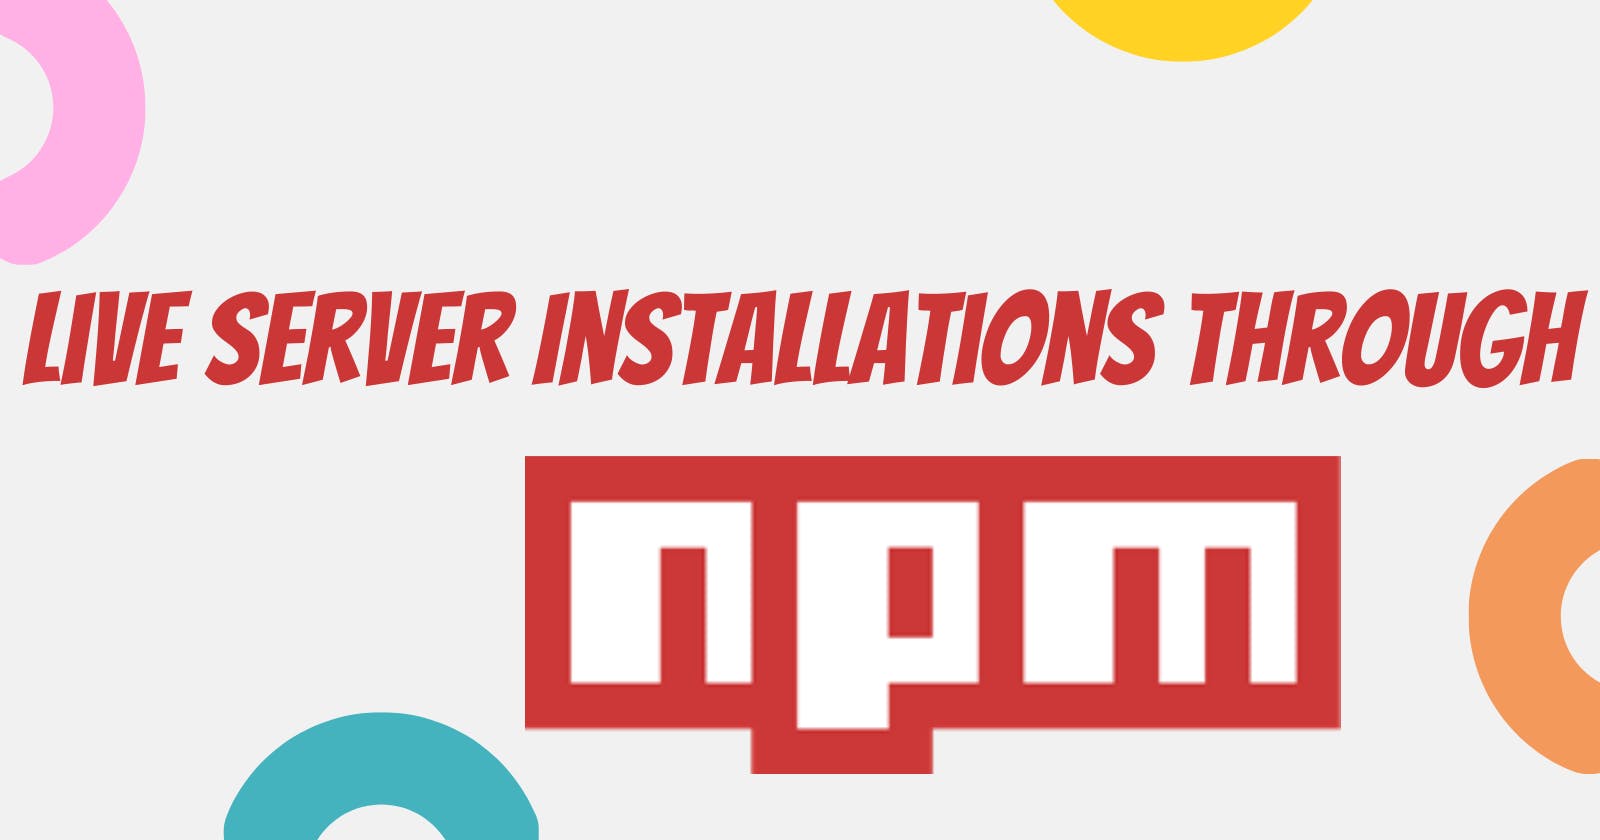 LIVE SERVER package installations through npm (node package managers)